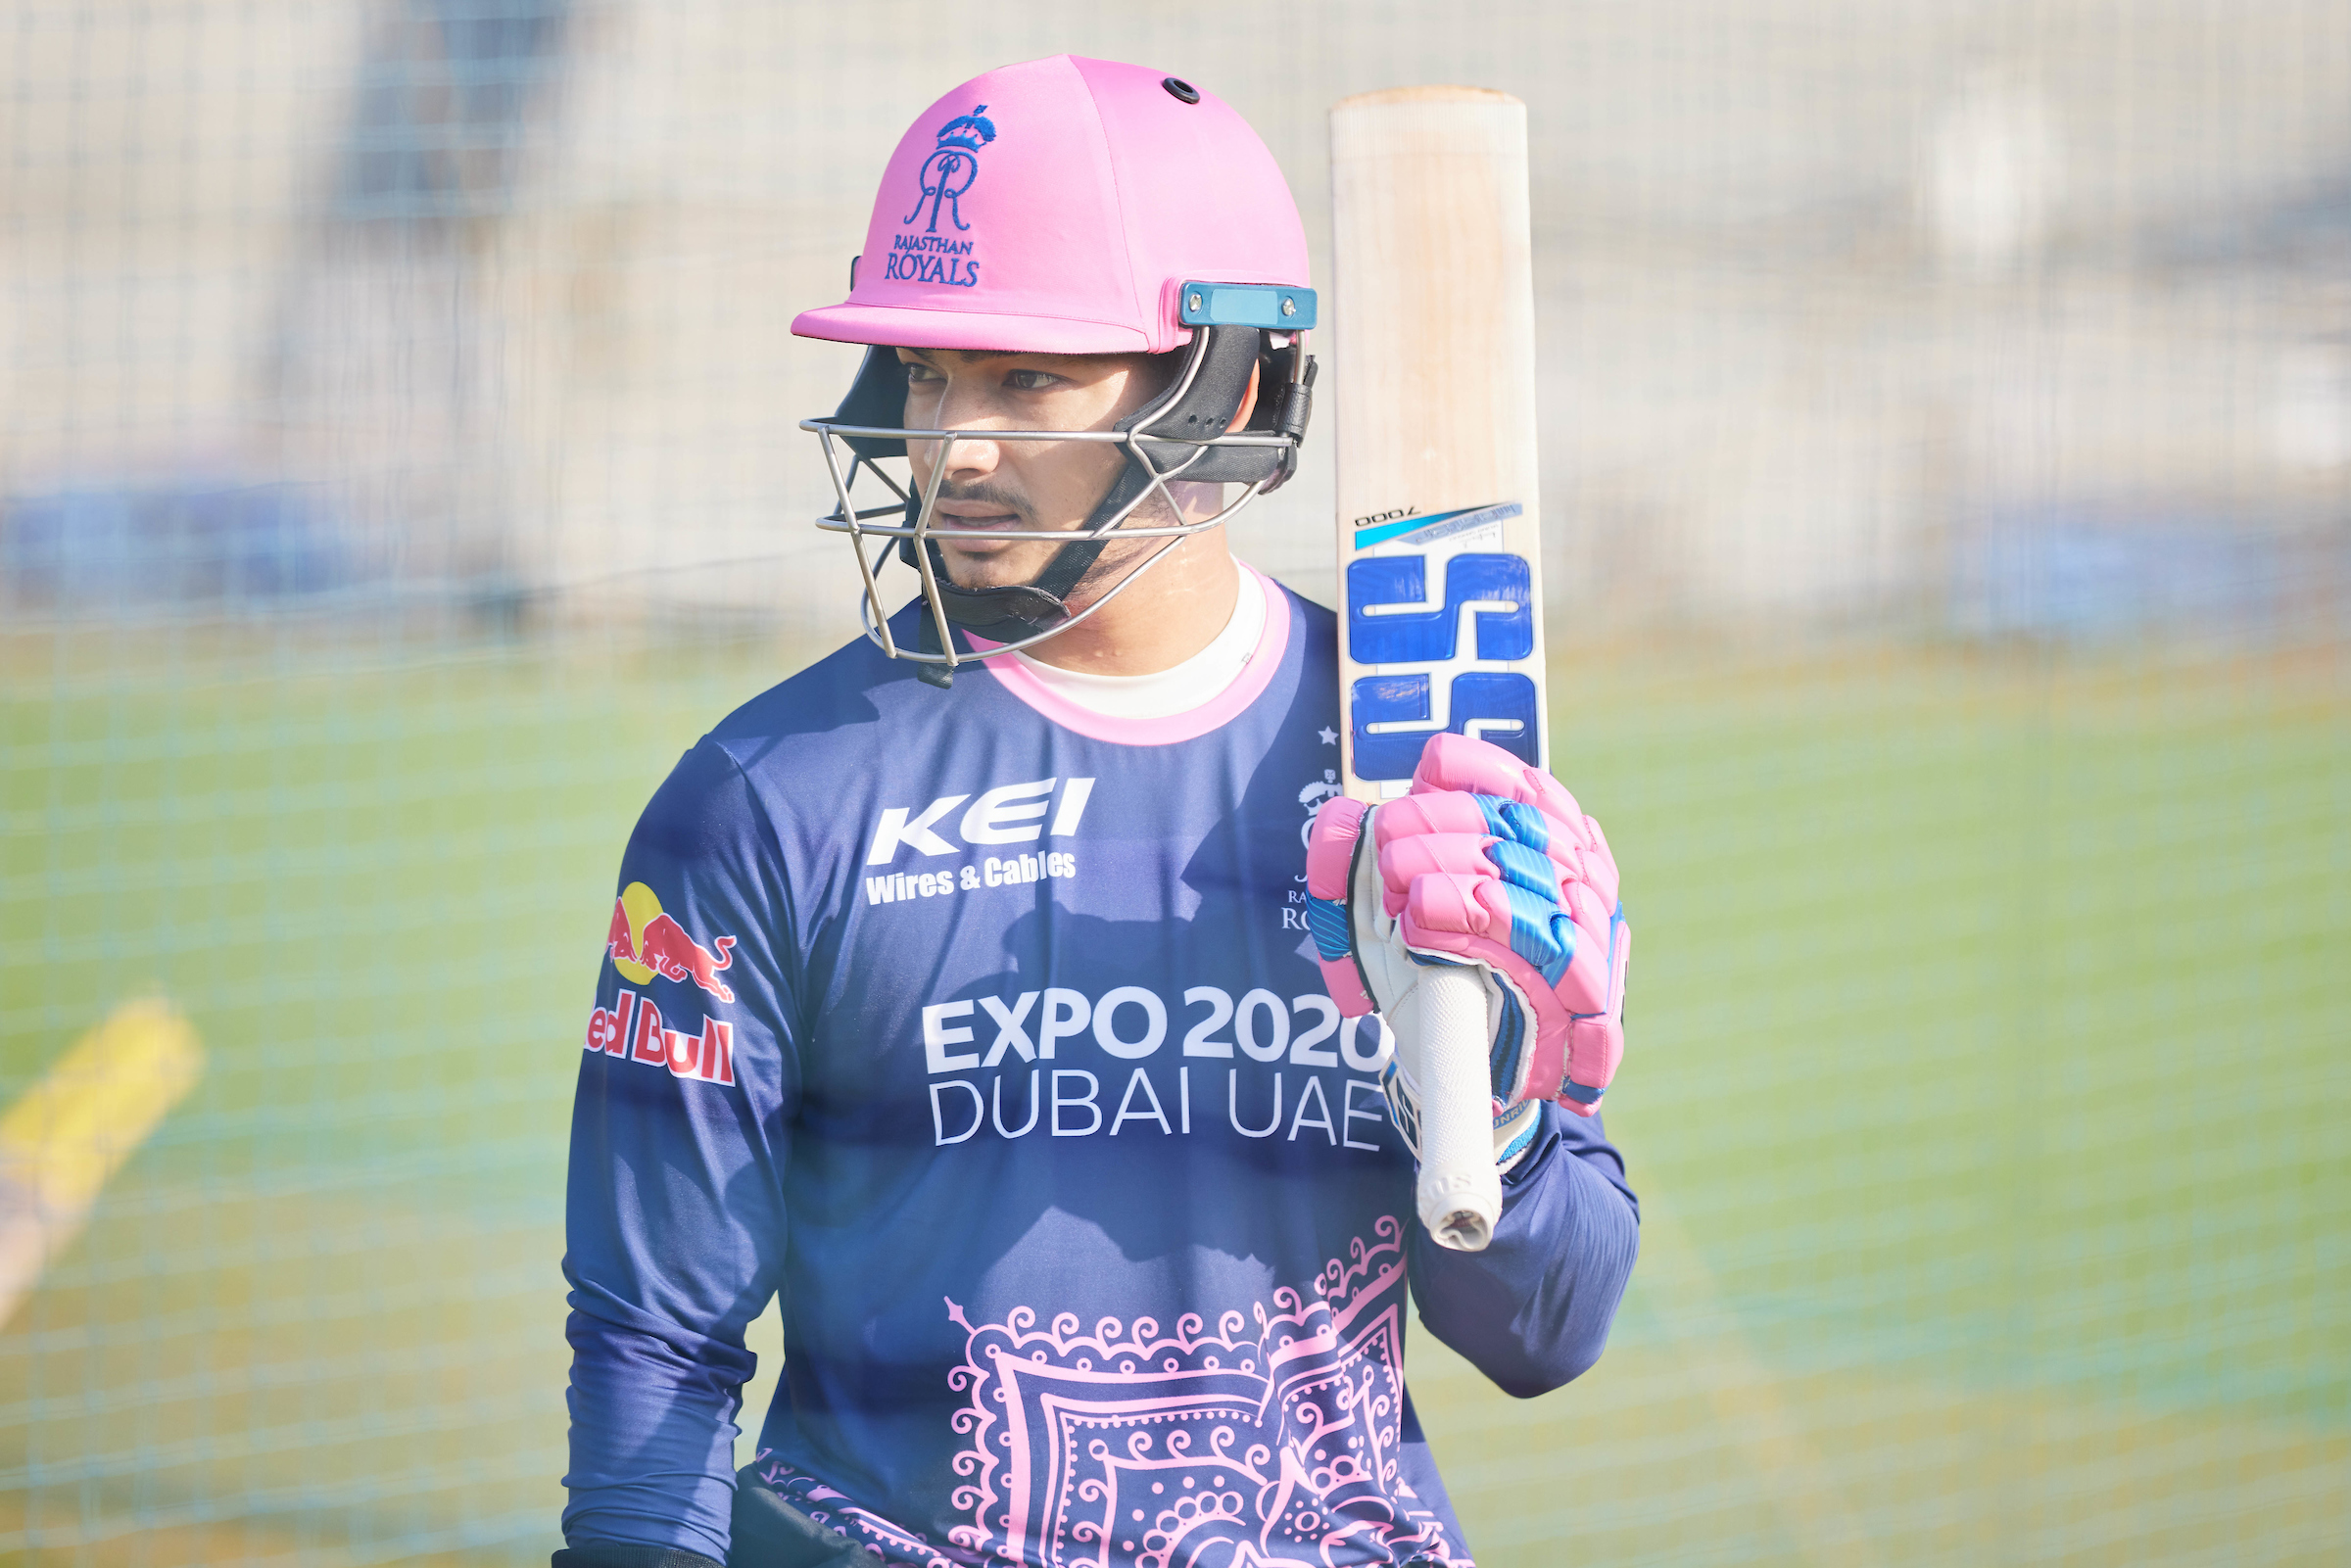 Wickets in the UAE suit my batting, says Rajasthan Royals’ talented youngster Anuj Rawat decoding=